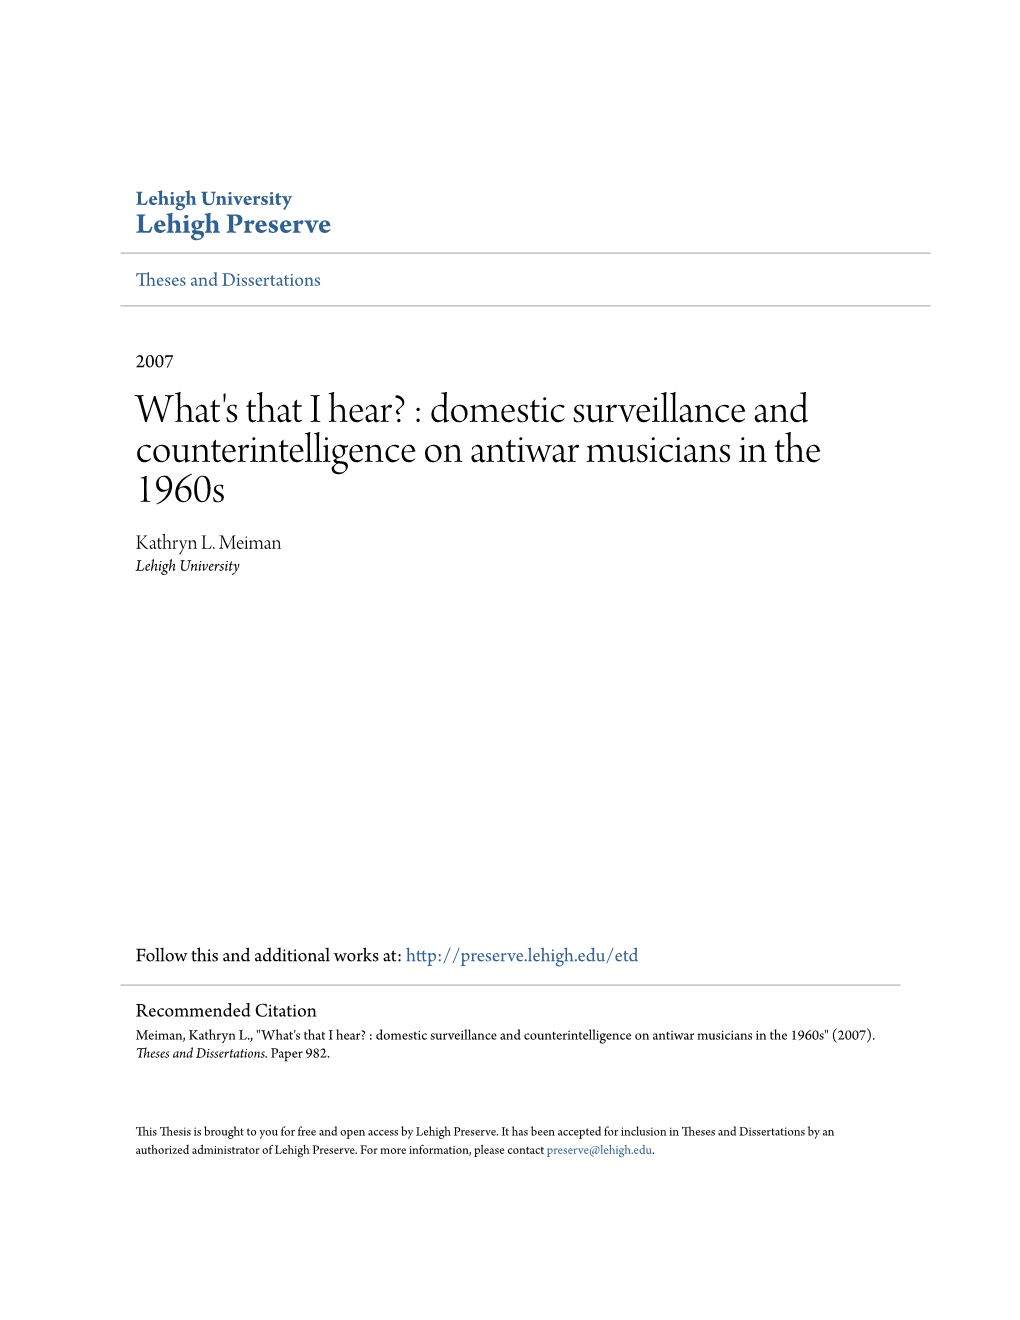 Domestic Surveillance and Counterintelligence on Antiwar Musicians in the 1960S Kathryn L